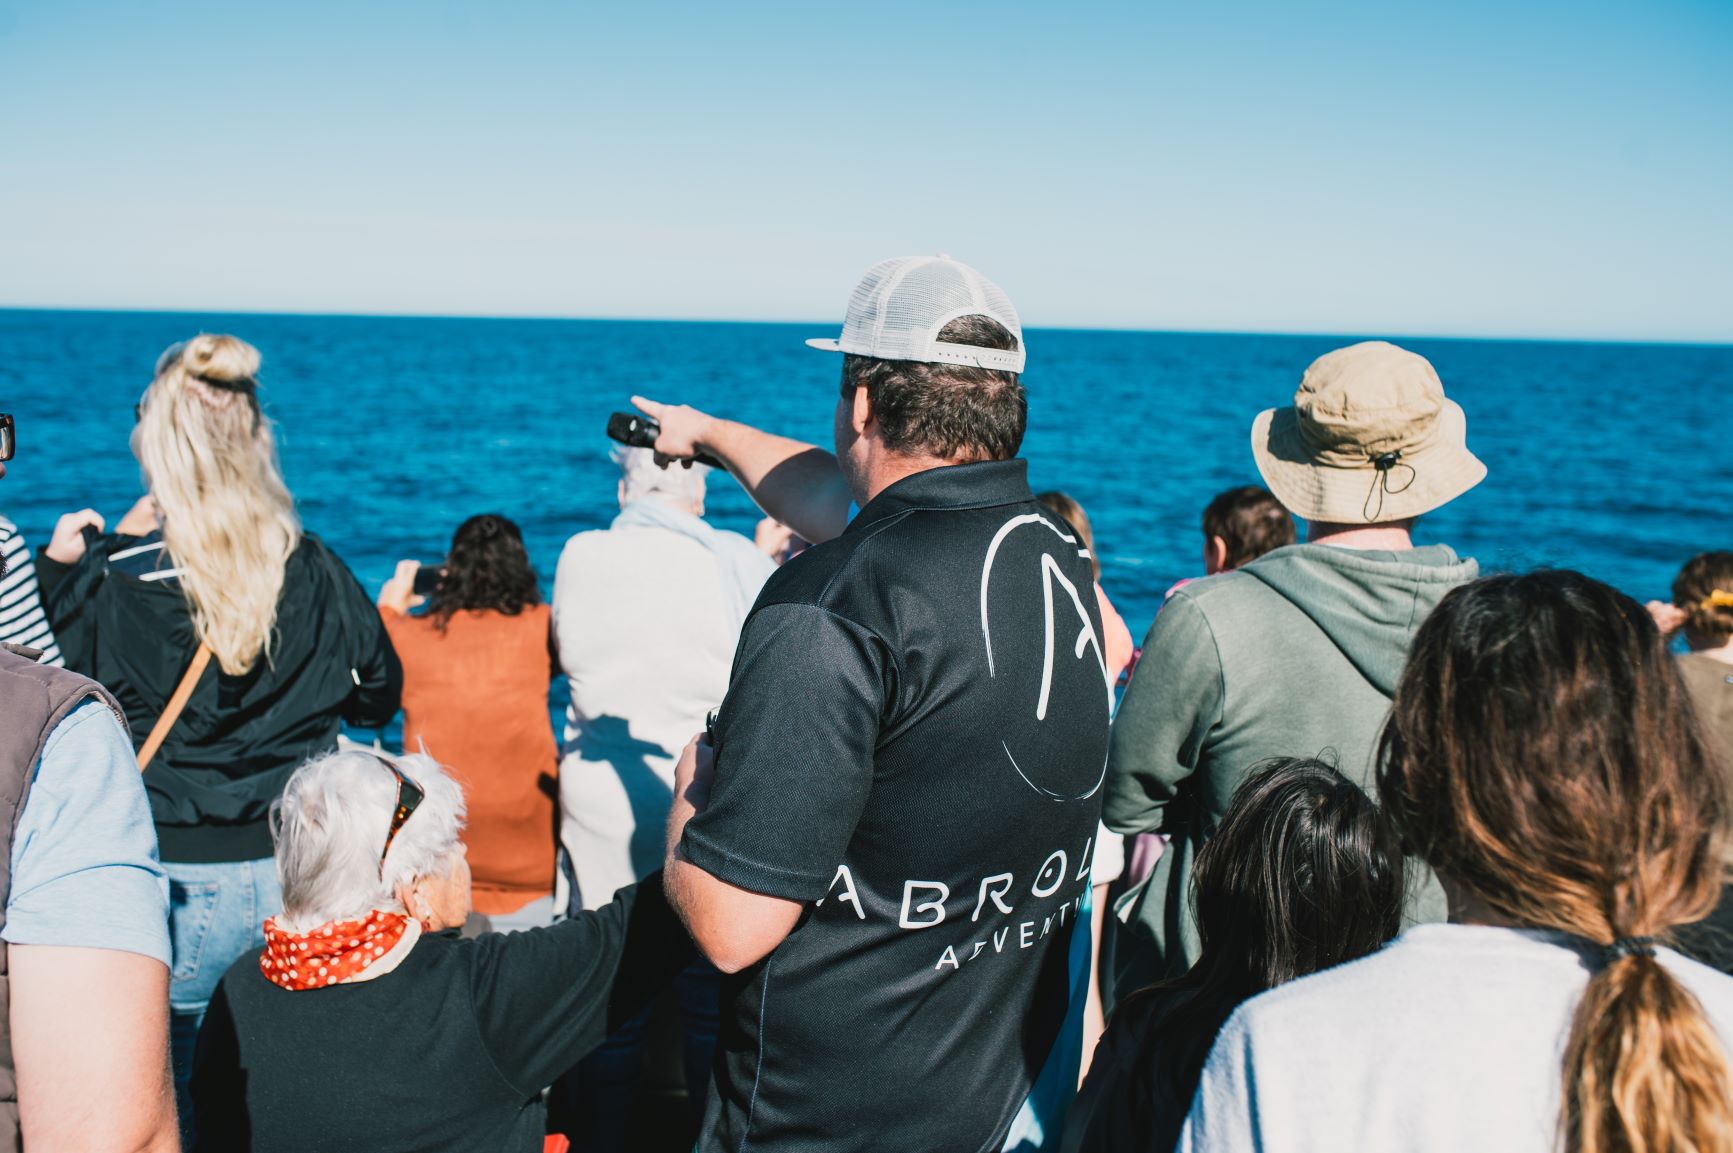 Abrolhos Islands Sightseeing & Historical Cruise with Dr Howard Gray